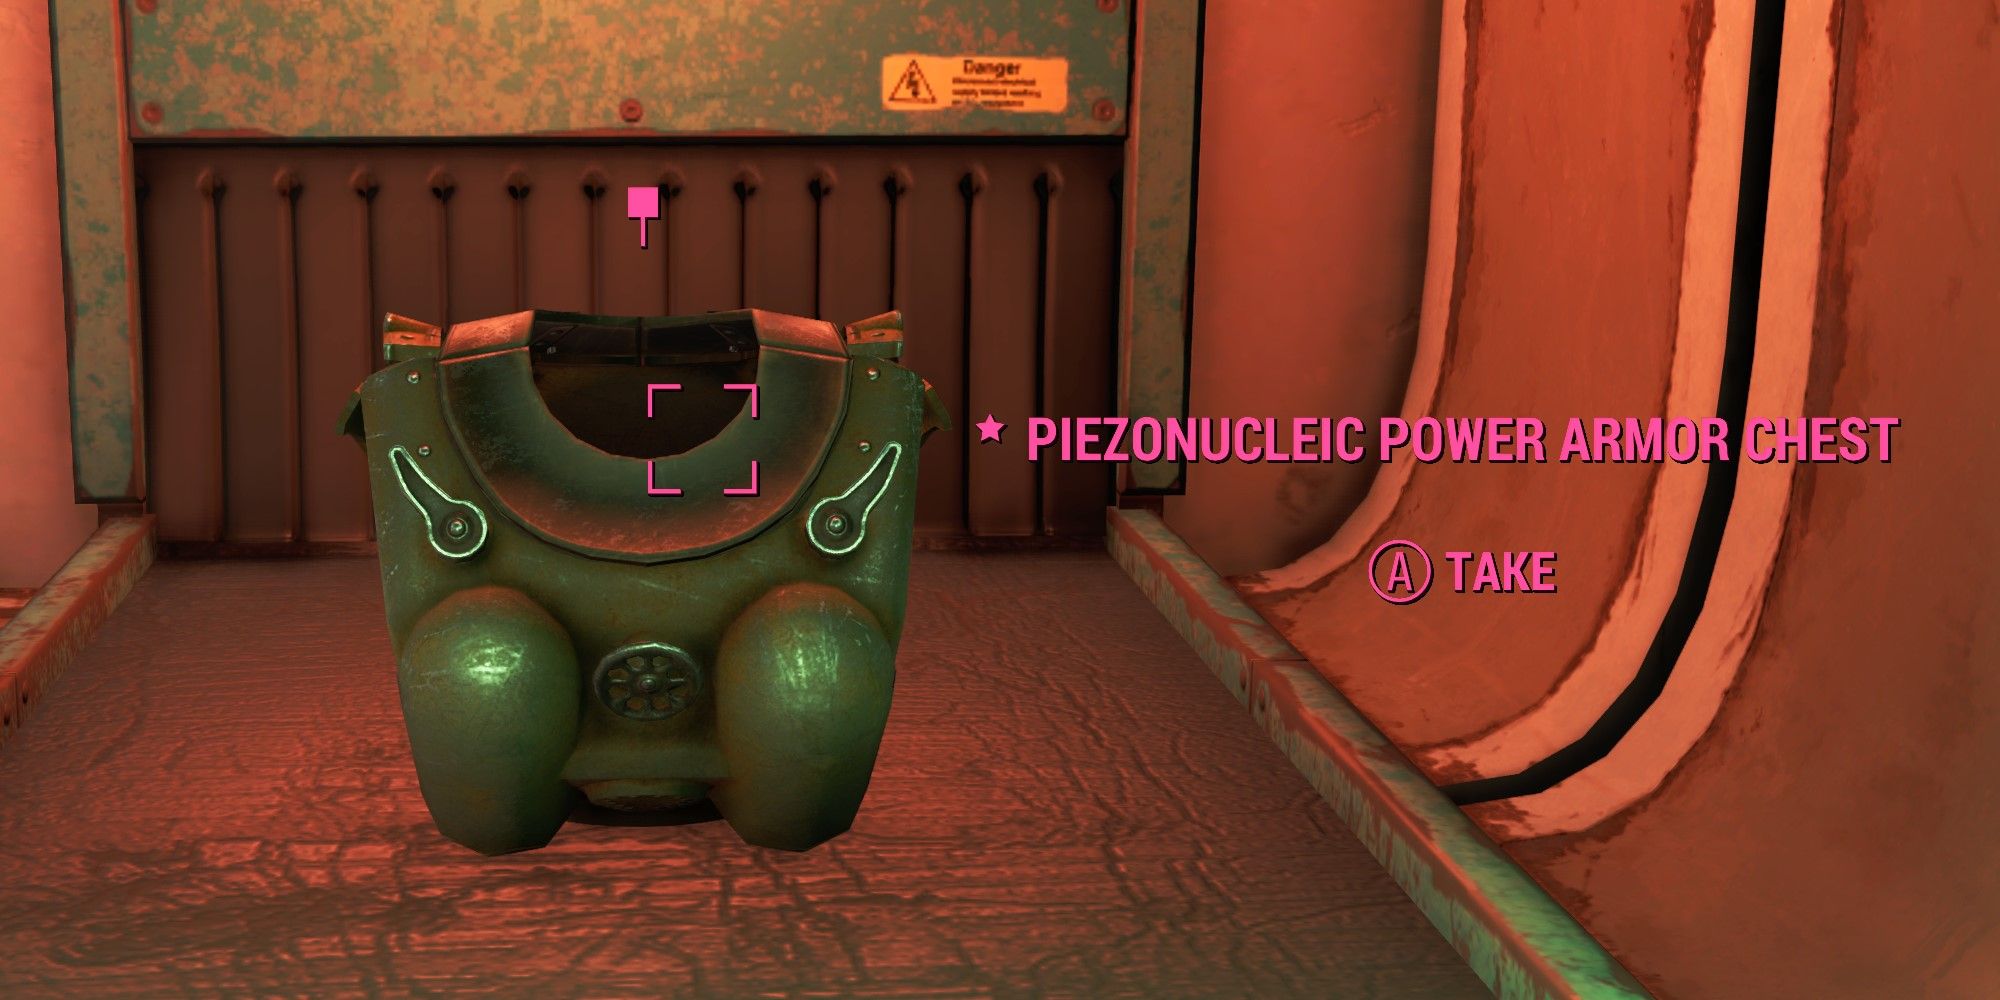 Fallout 4 screenshot Cambridge Polymer Labs Piezonucleic Power Armor Chest on surface